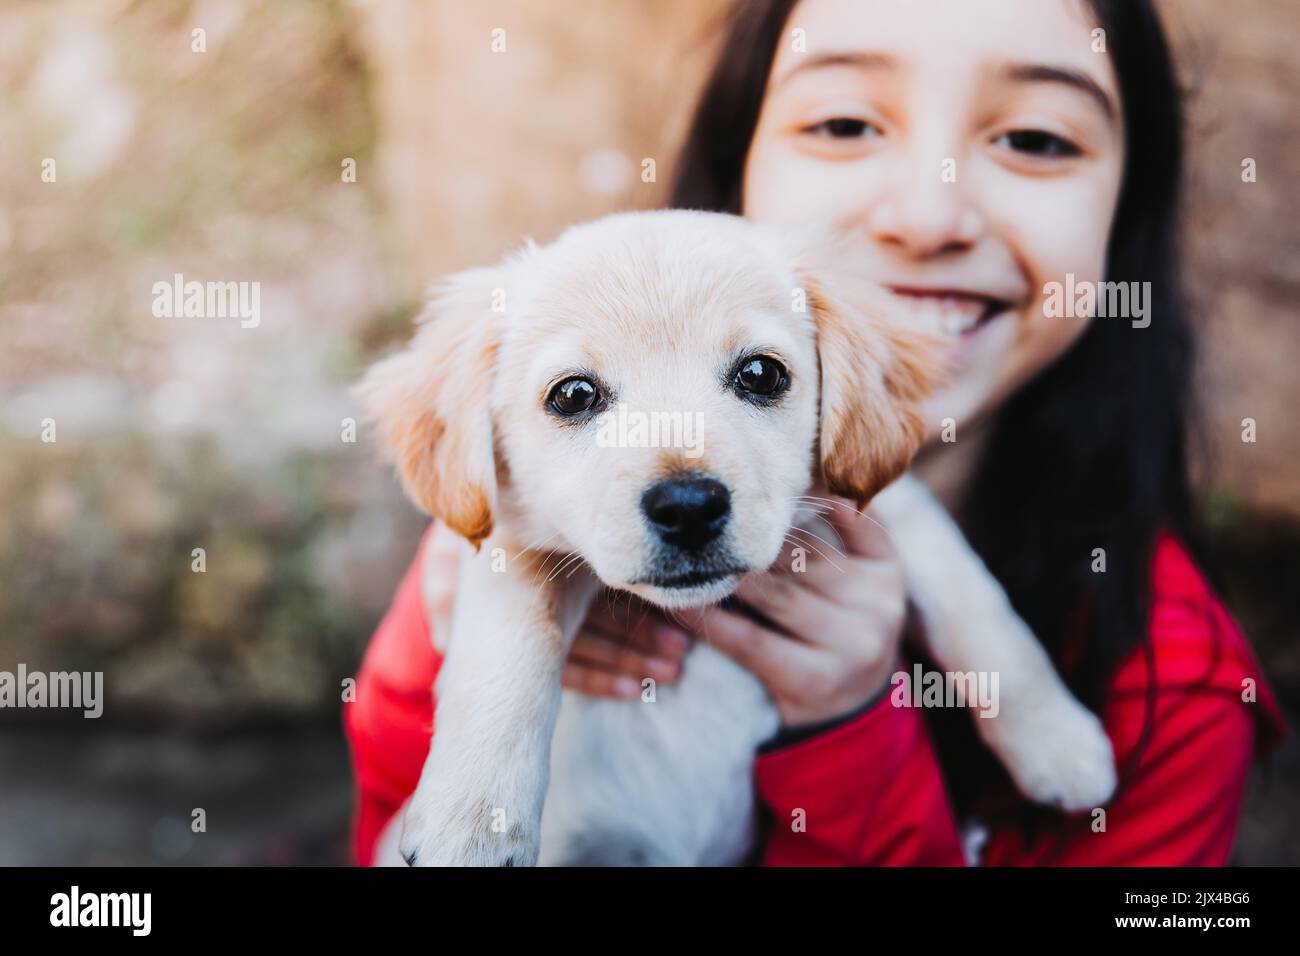 Smiling little girl embracing a golden retriever puppy in the park Stock Photo